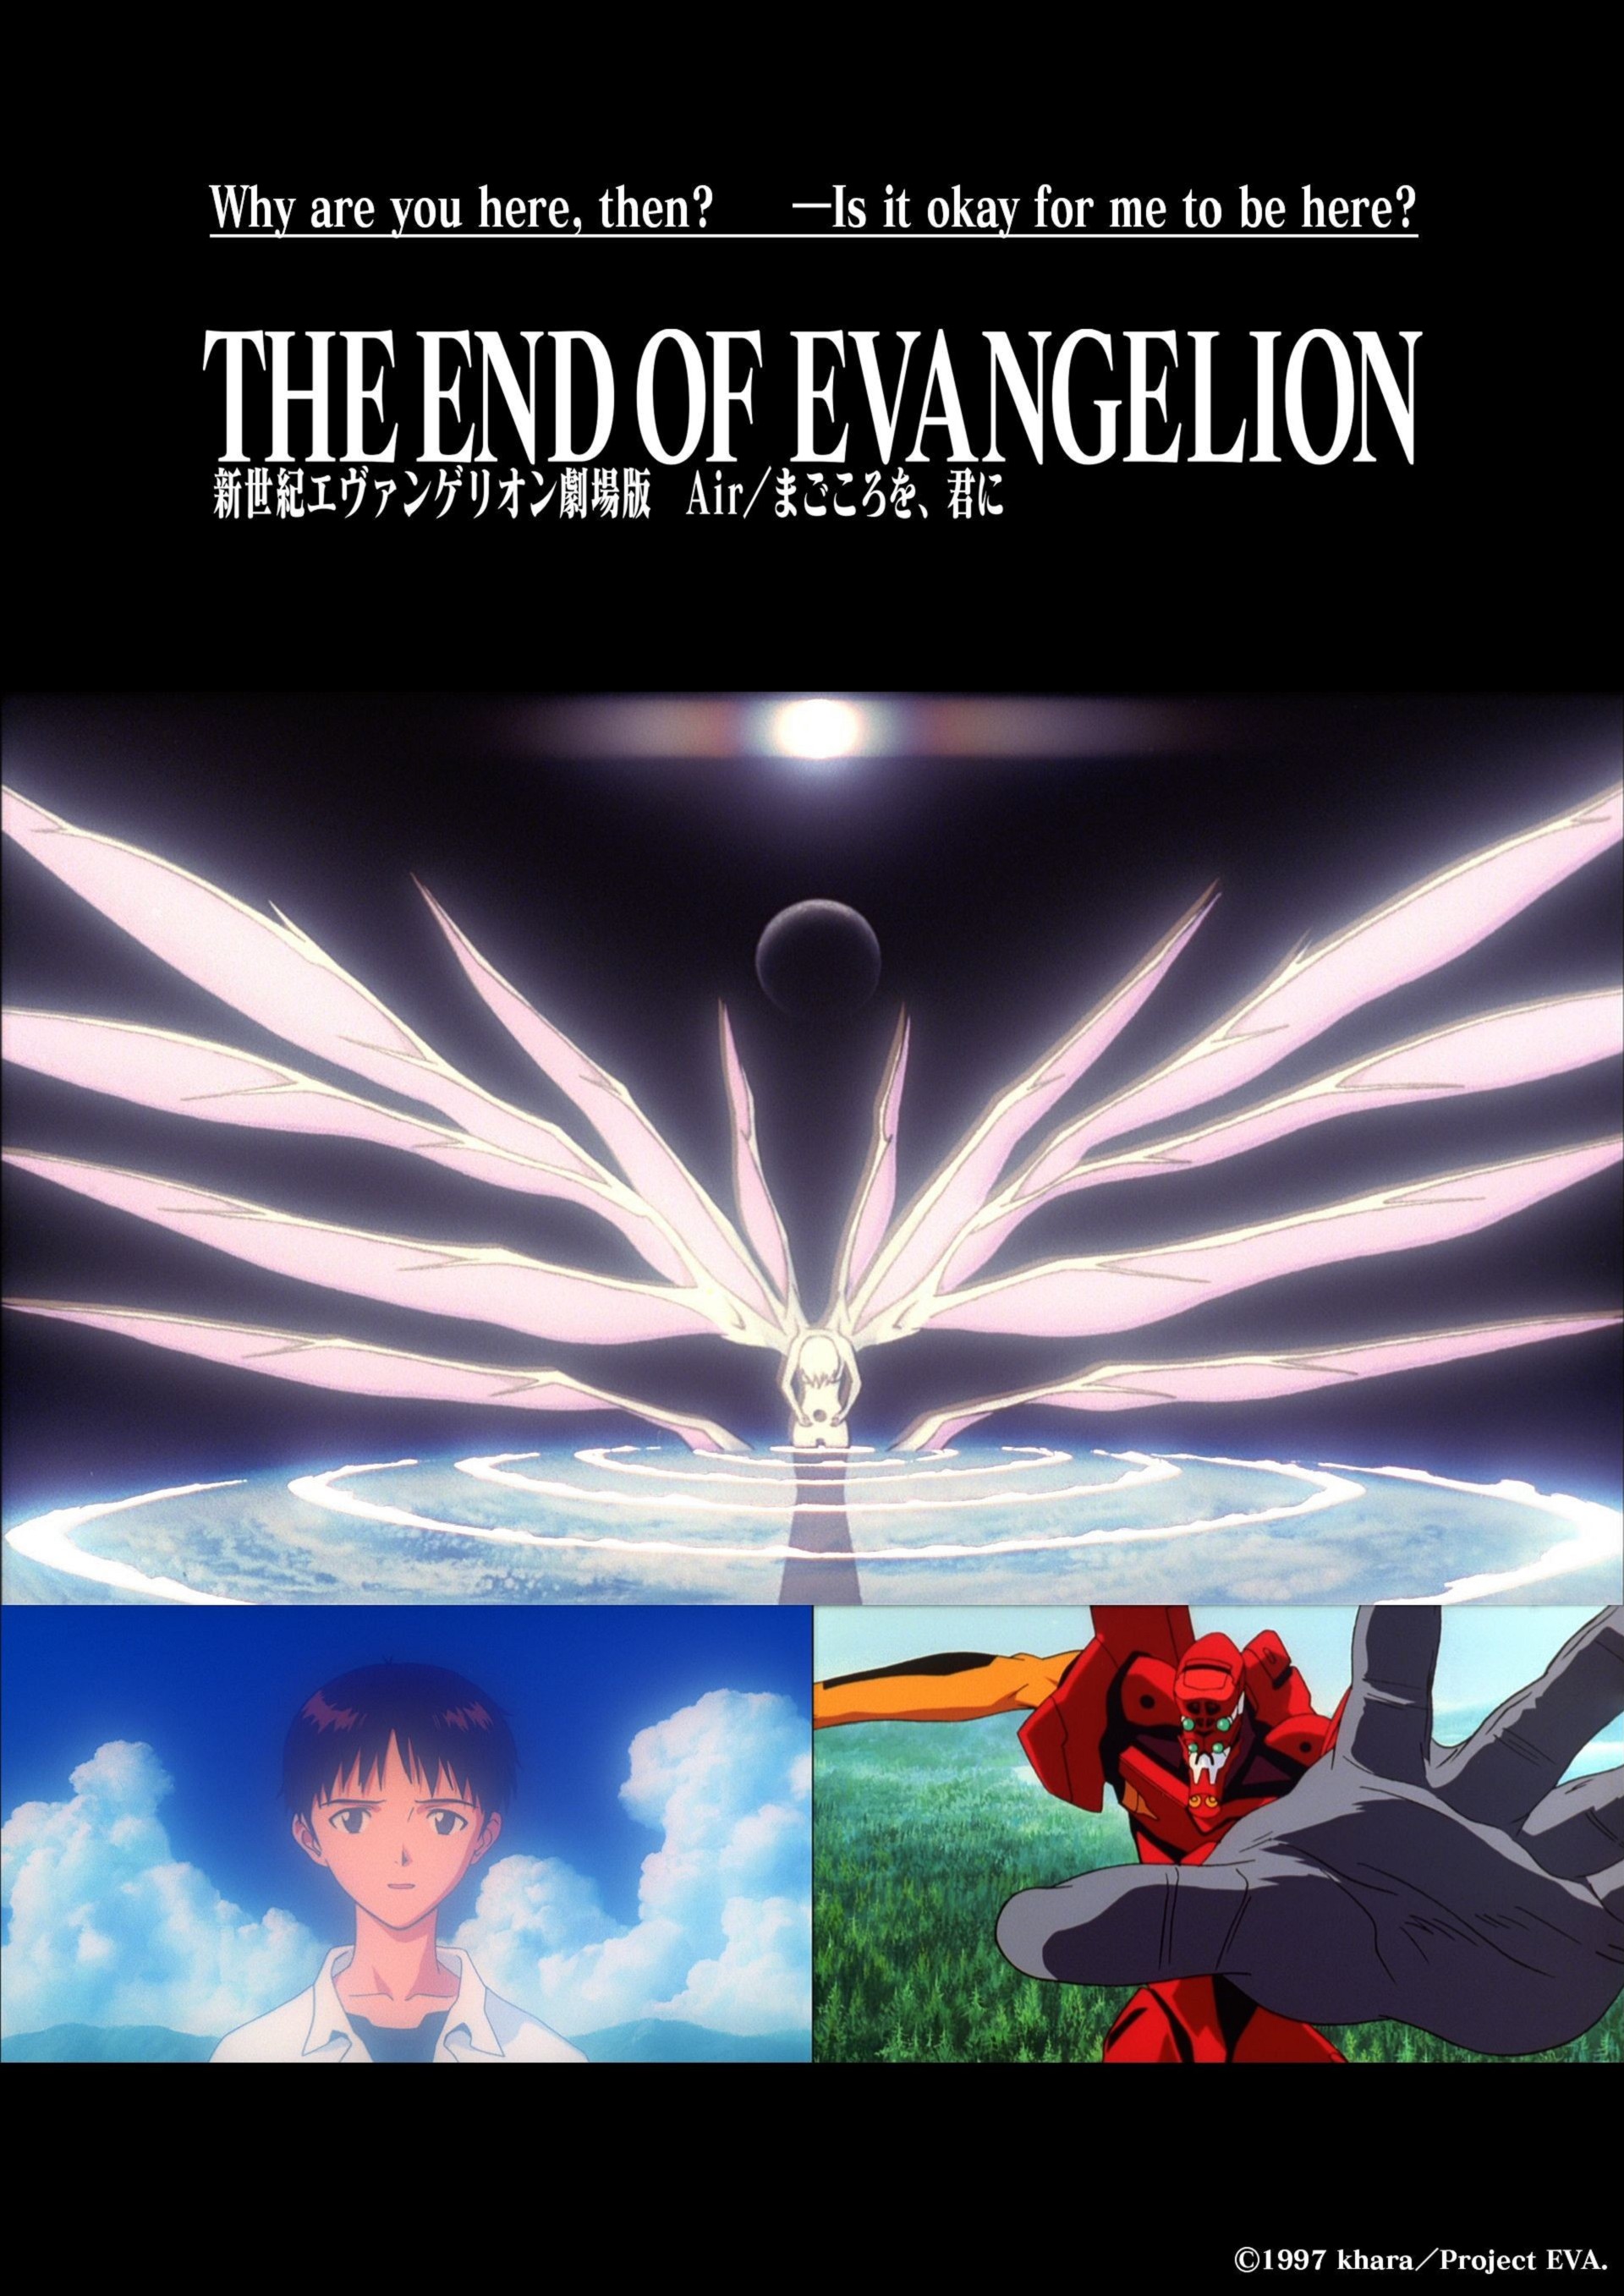 THE END OF EVANGELION